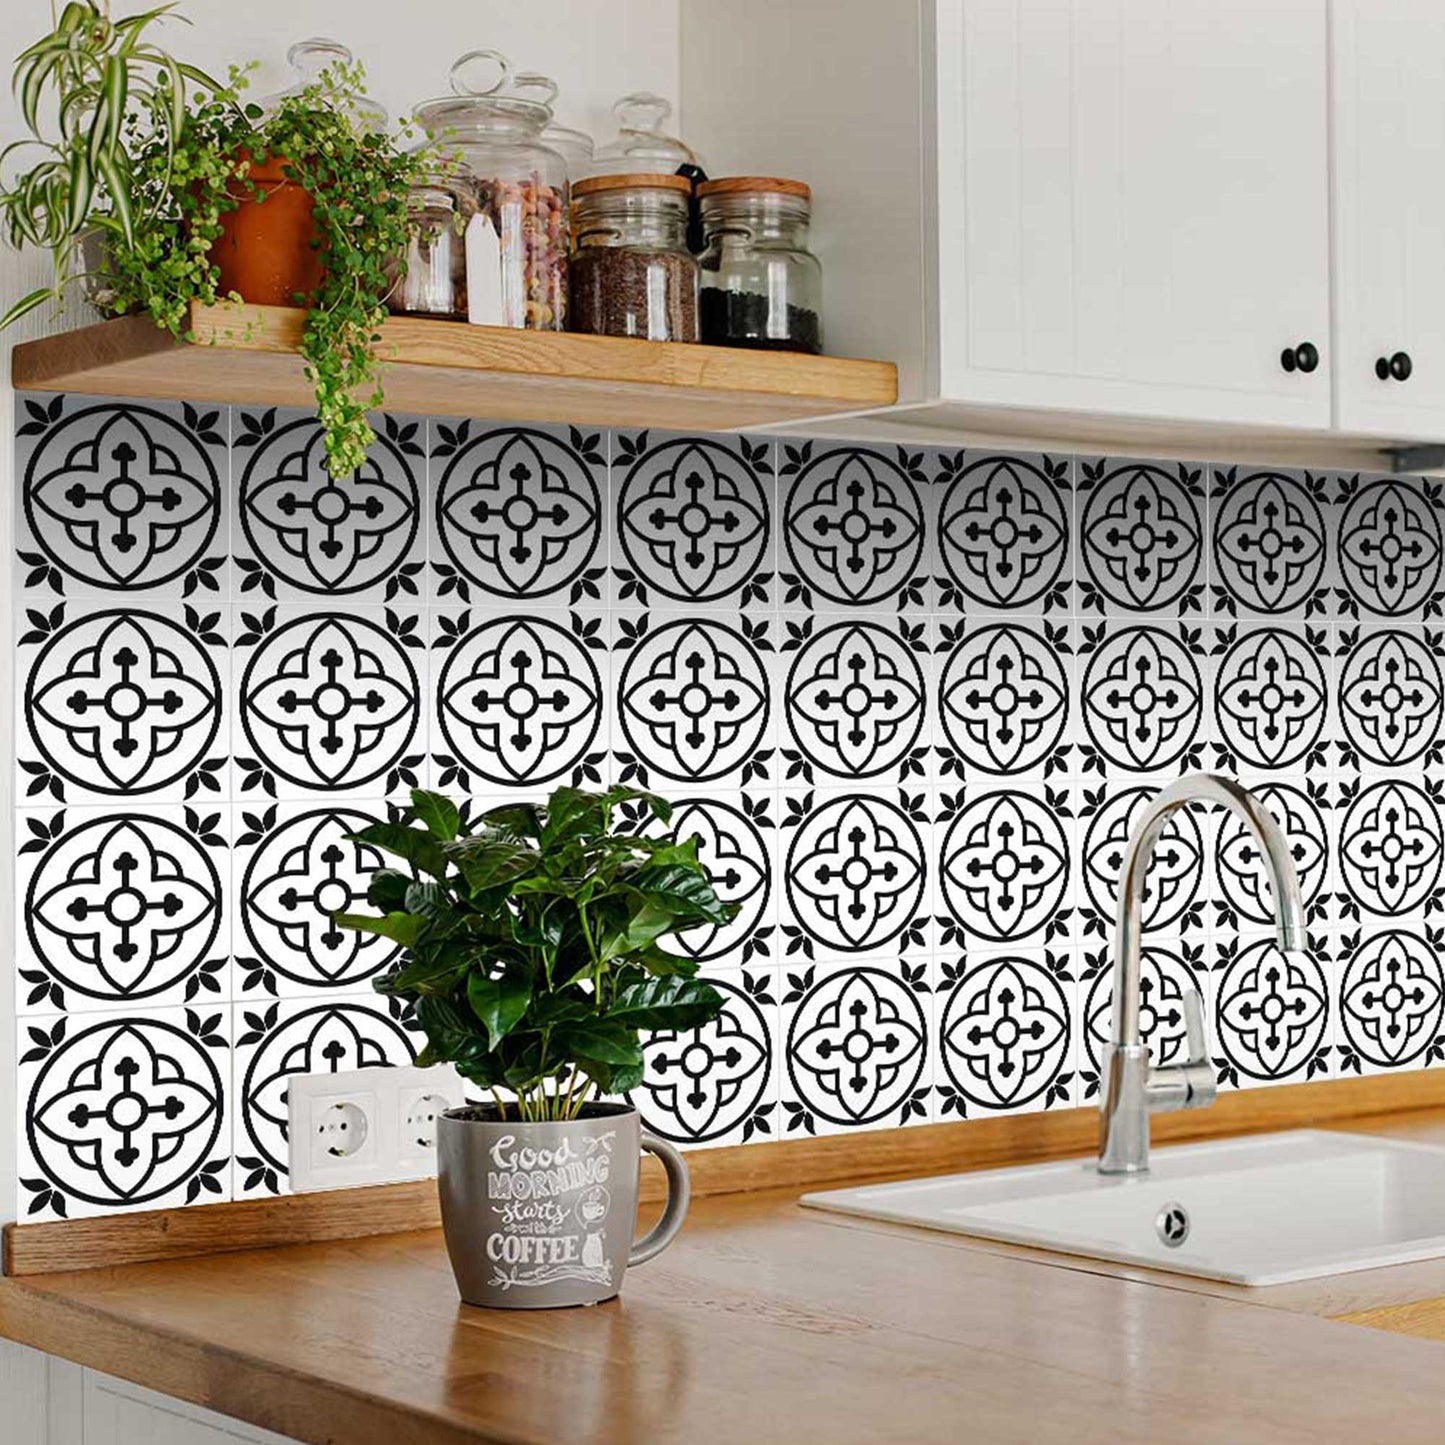 8" X 8" Black and White Peel and Stick Removable Tiles